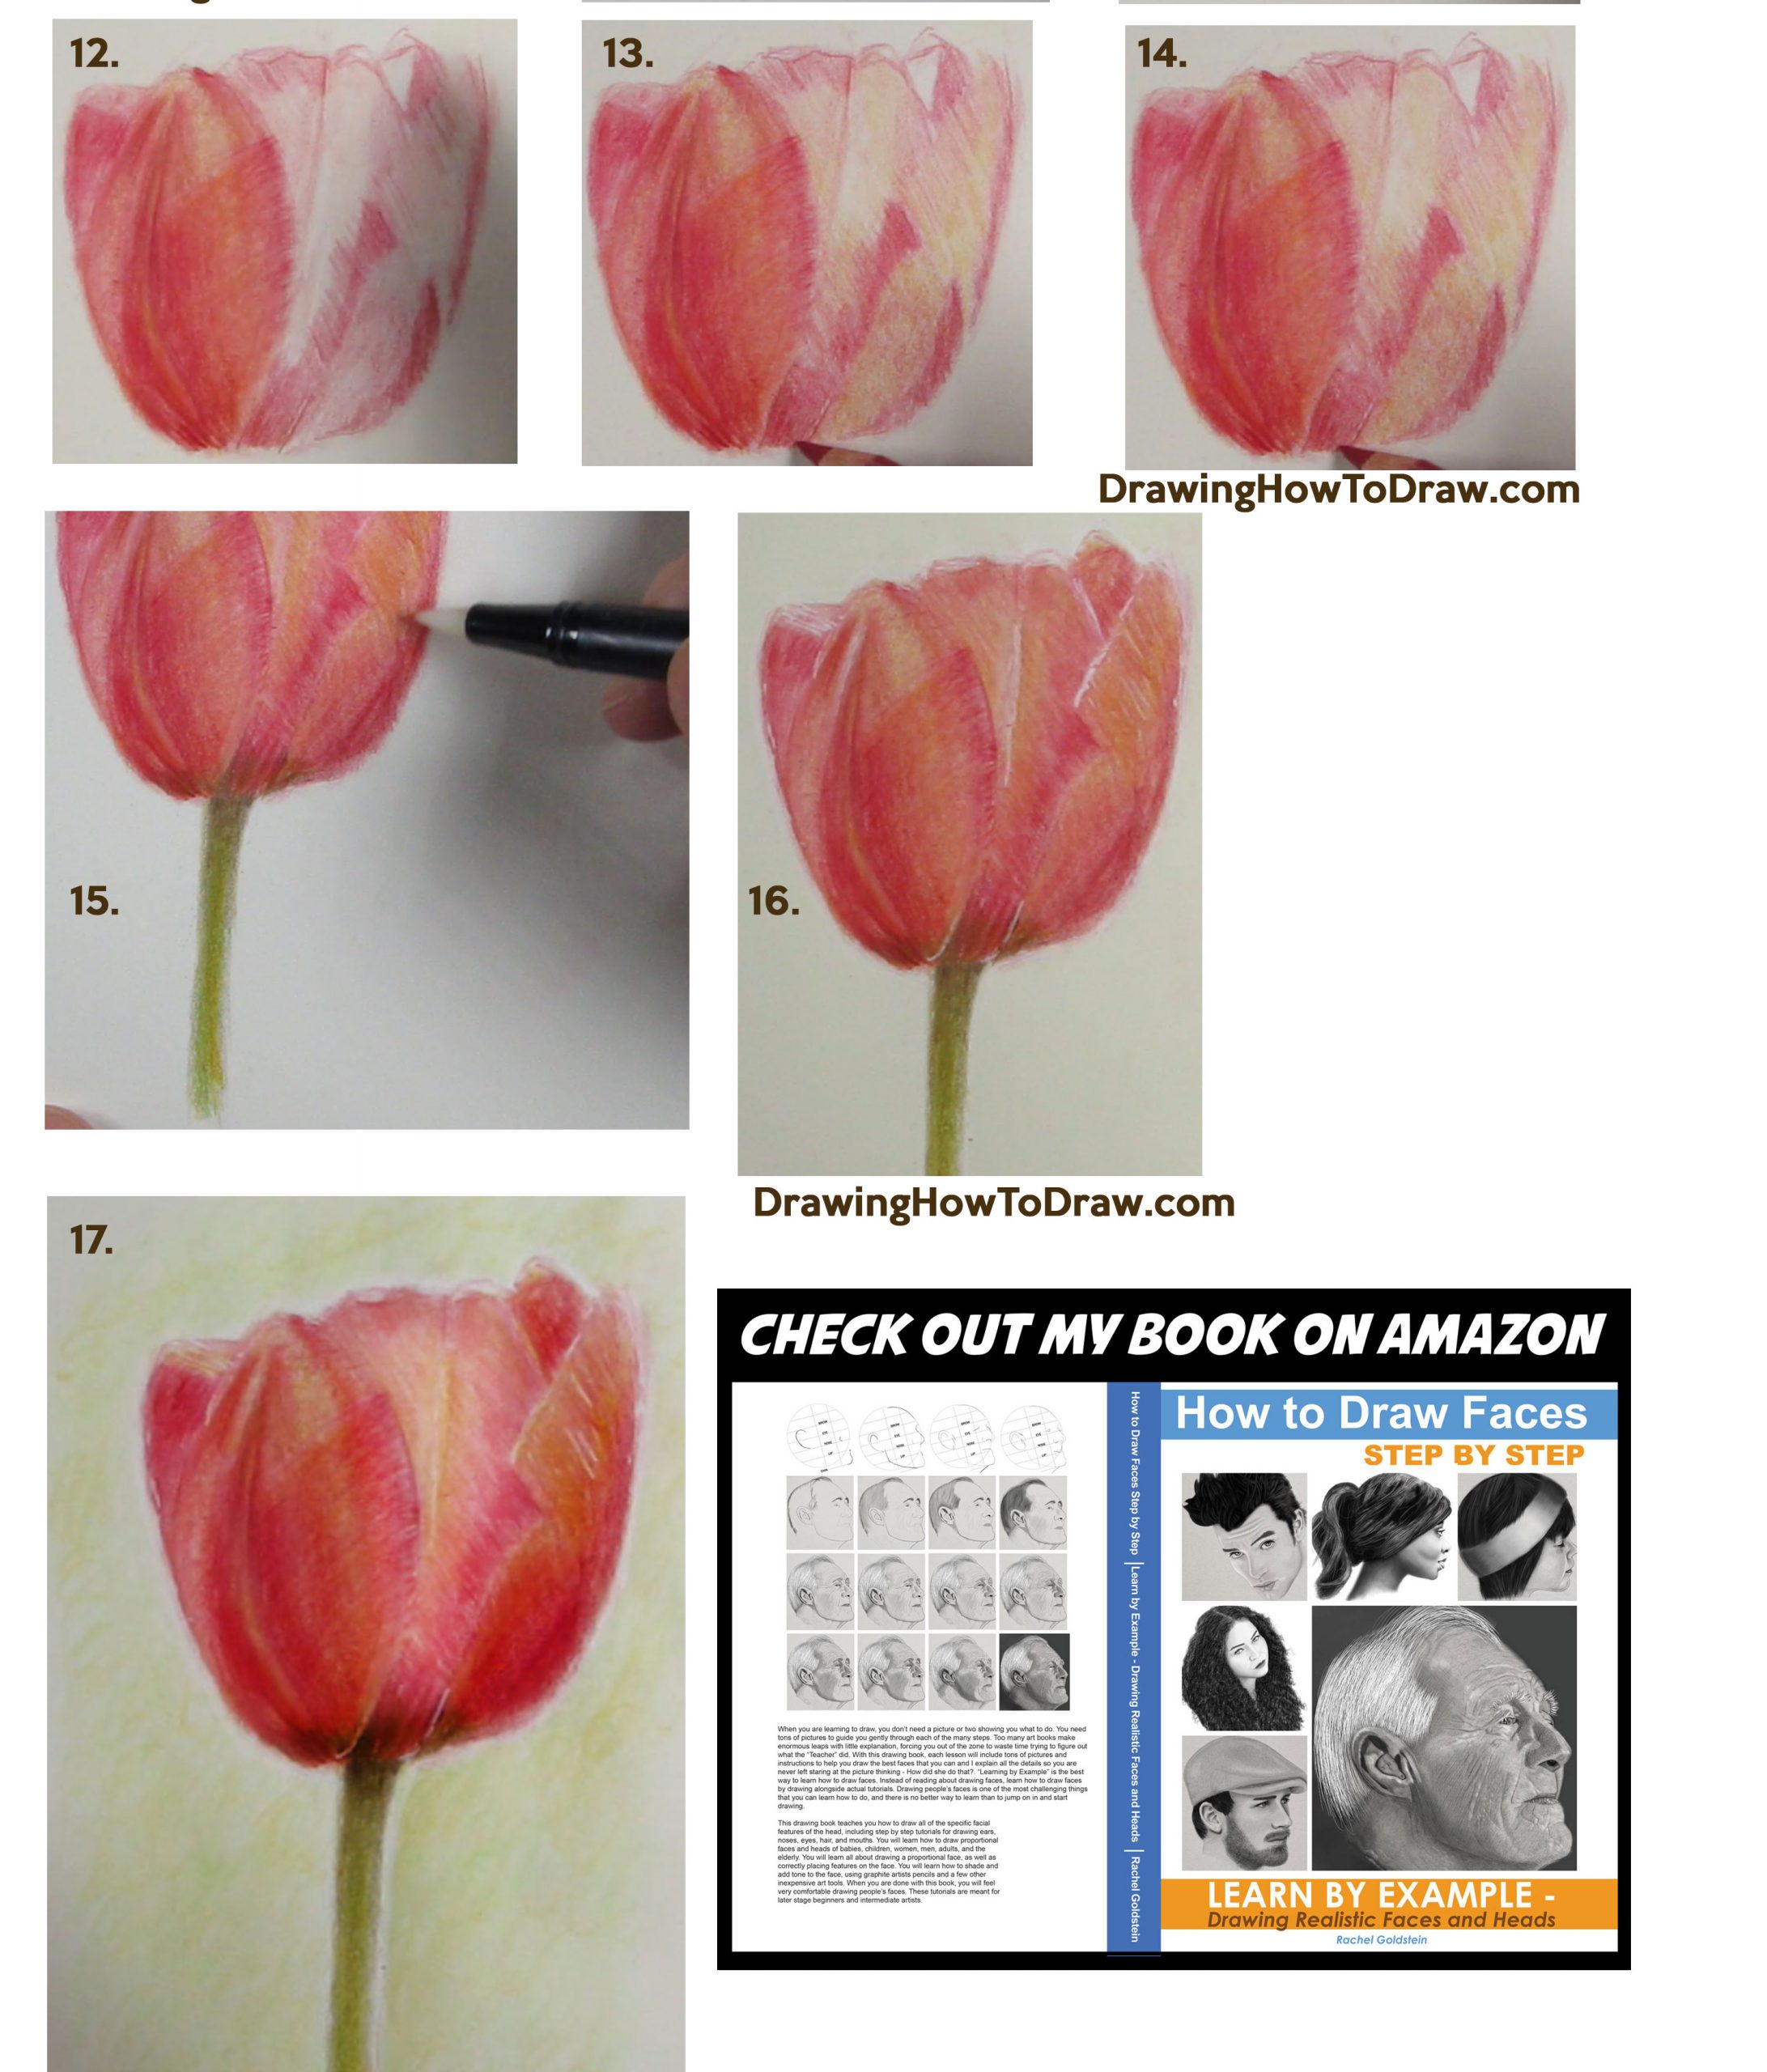 How to Draw Tulips with Colored Pencils Easy Step by Step Drawing